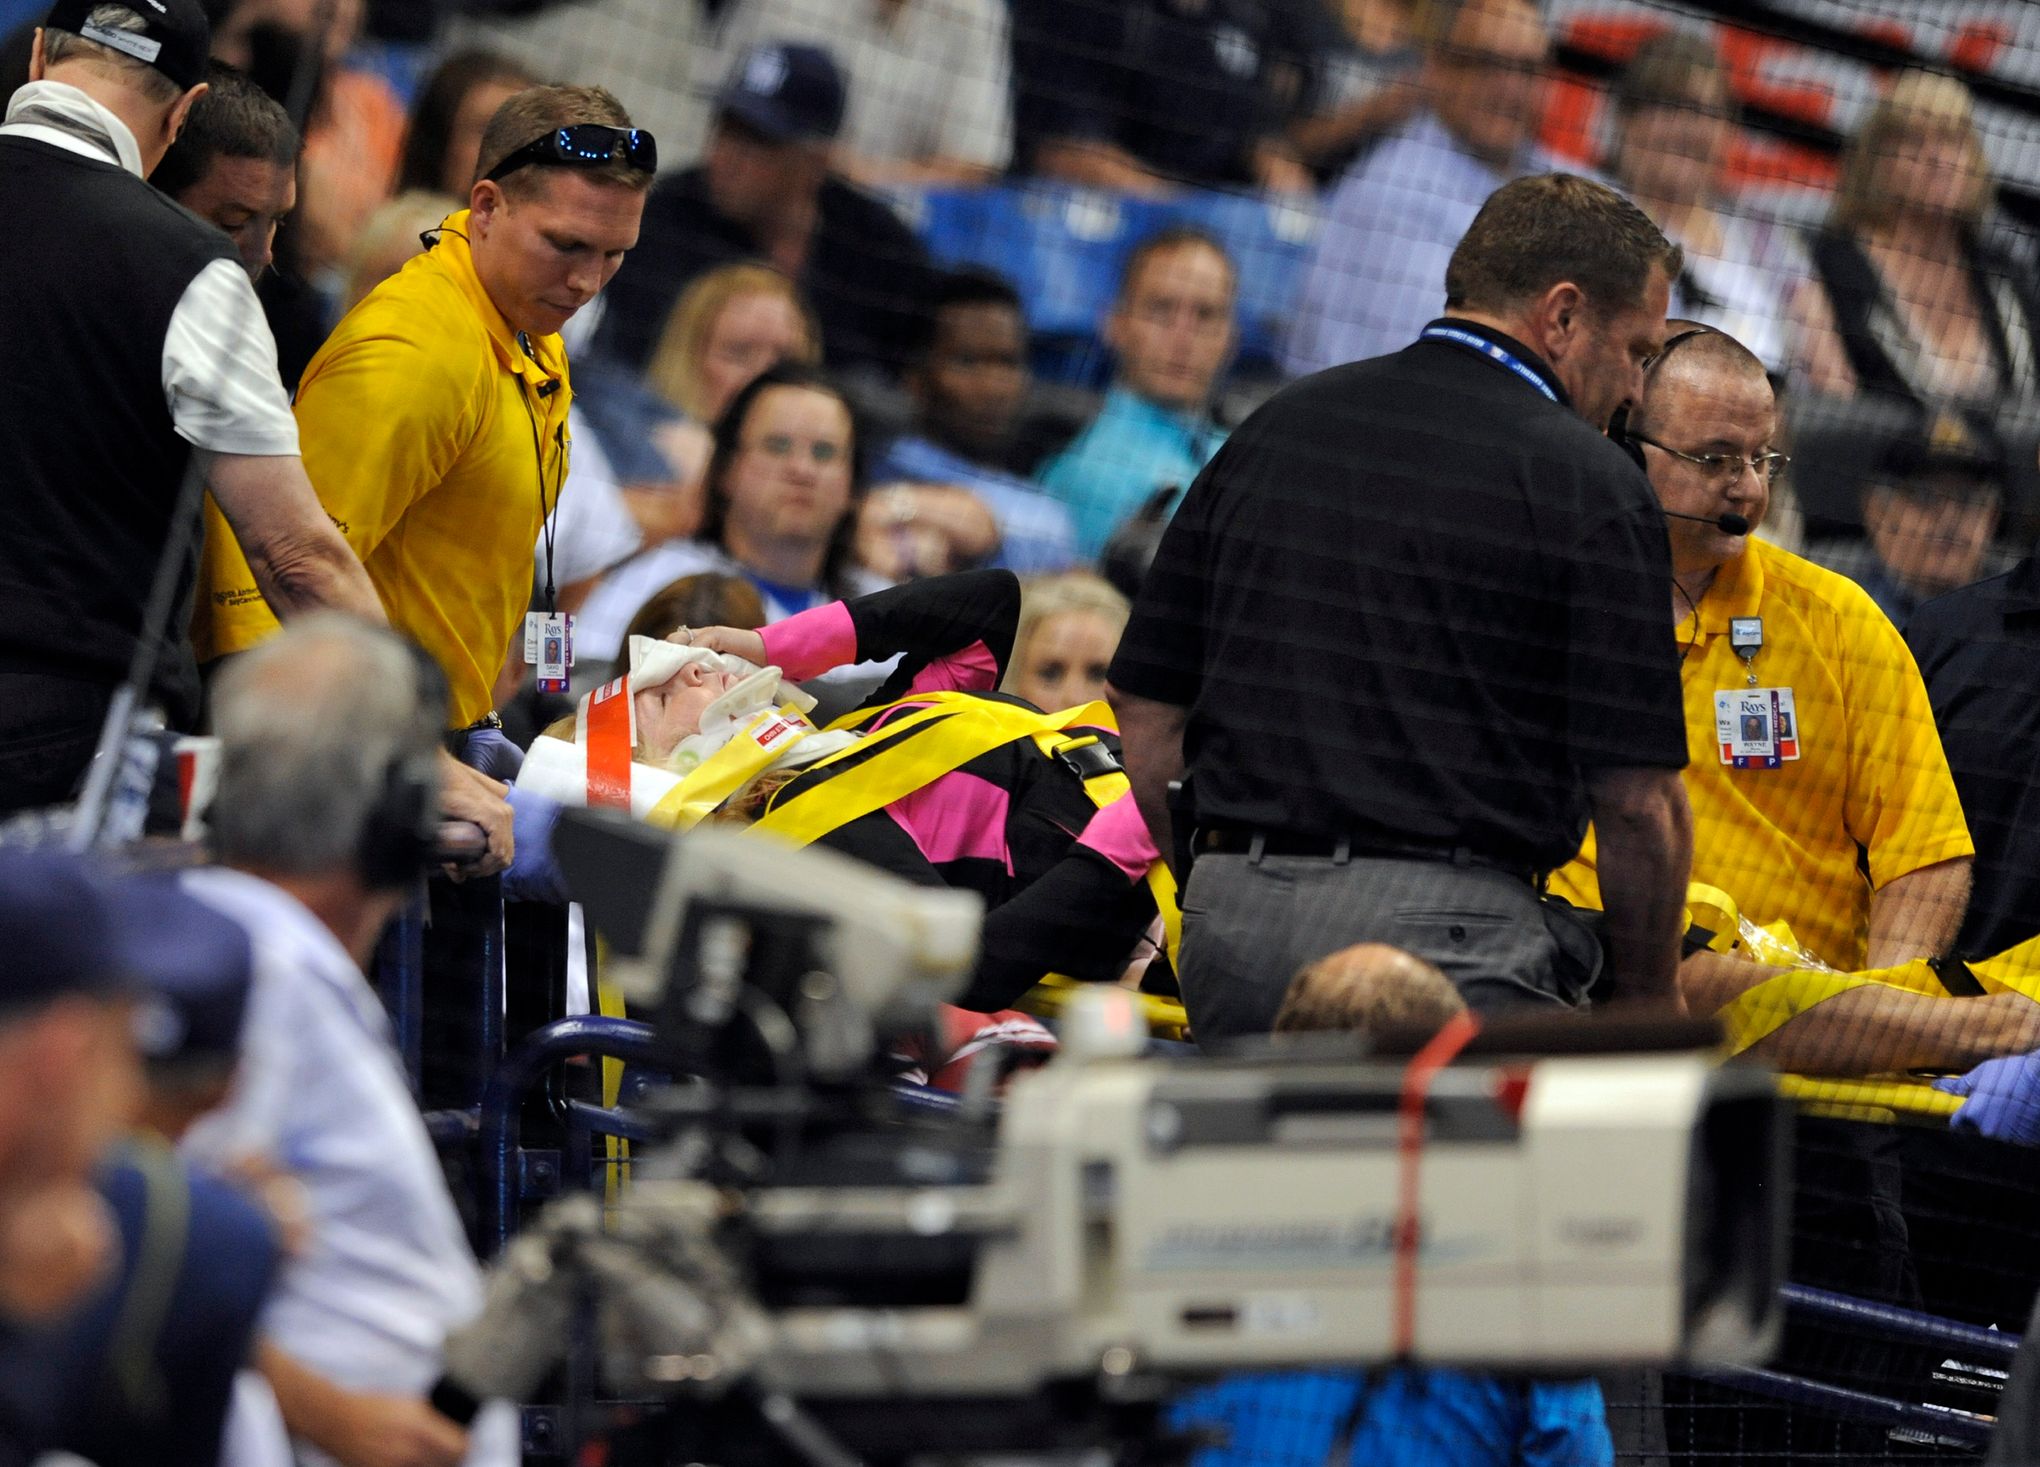 Woman hit by foul ball at Tampa Bay Rays game in stable condition